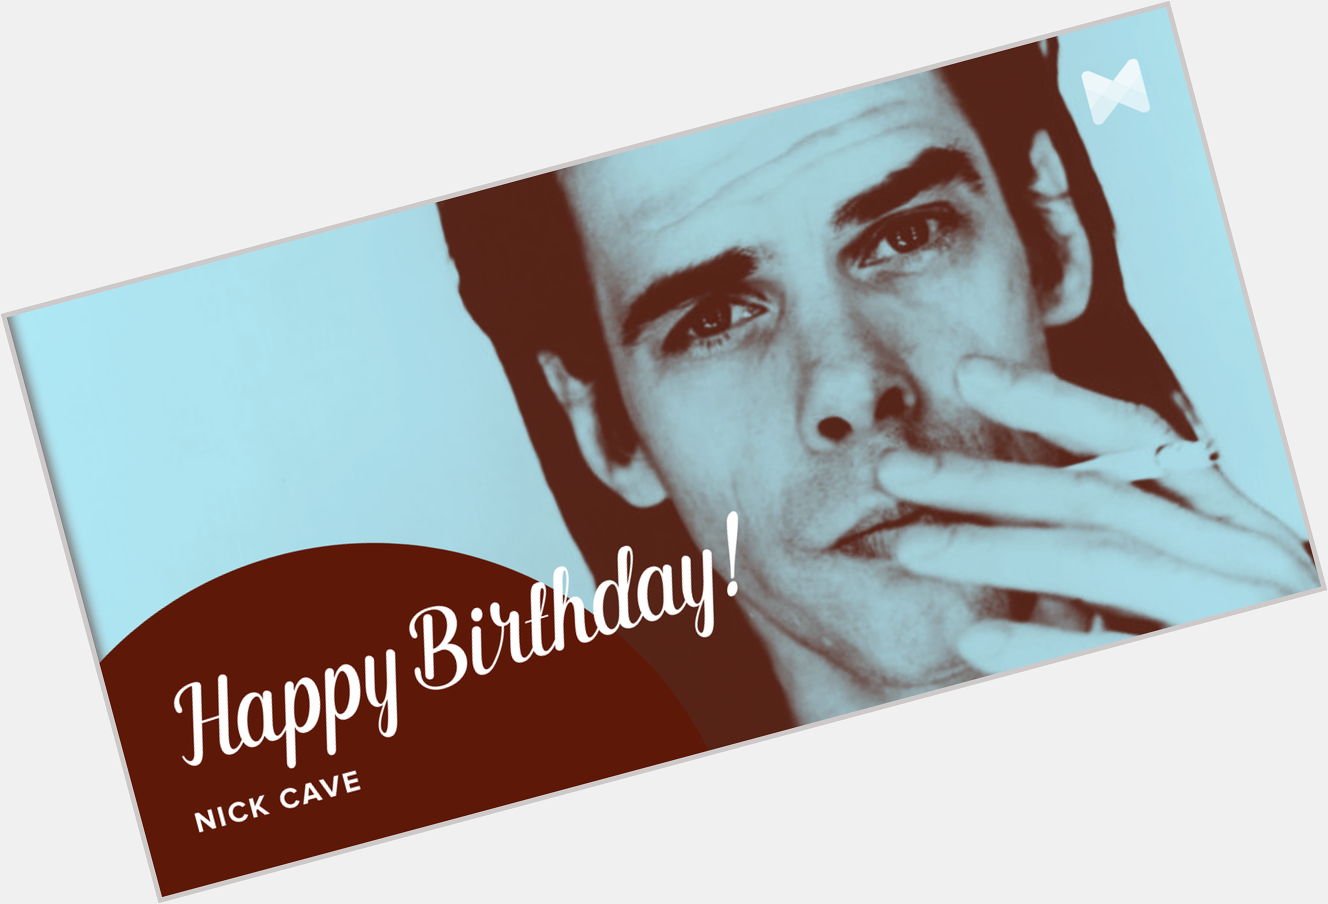 Happy 58th Birthday to Nick Cave! 